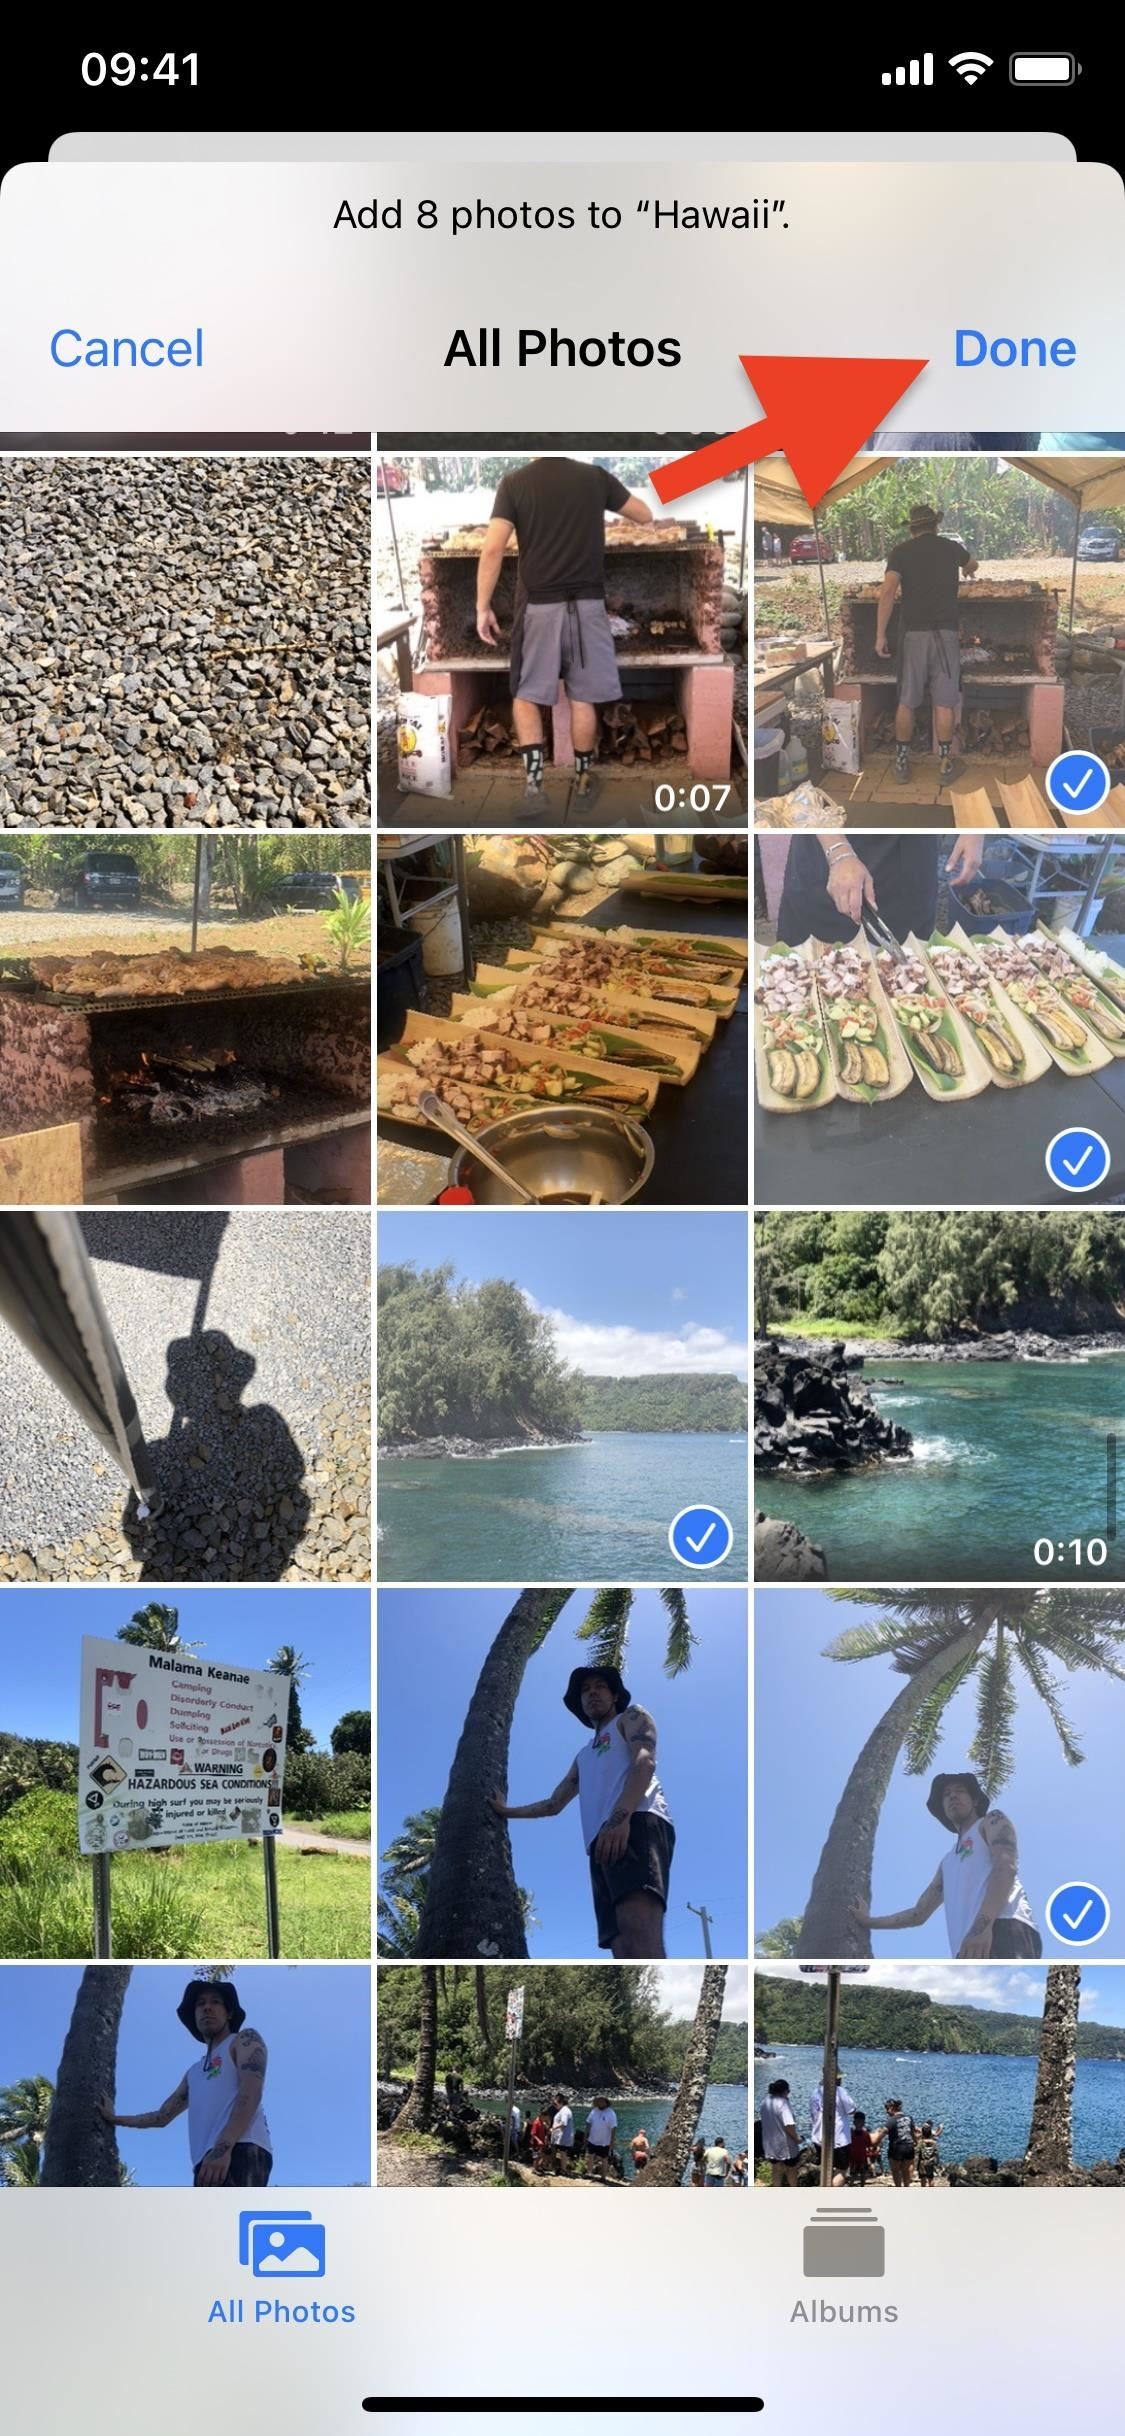 iOS 14 Makes It Easier to Turn Albums into Slideshows from the Photos App